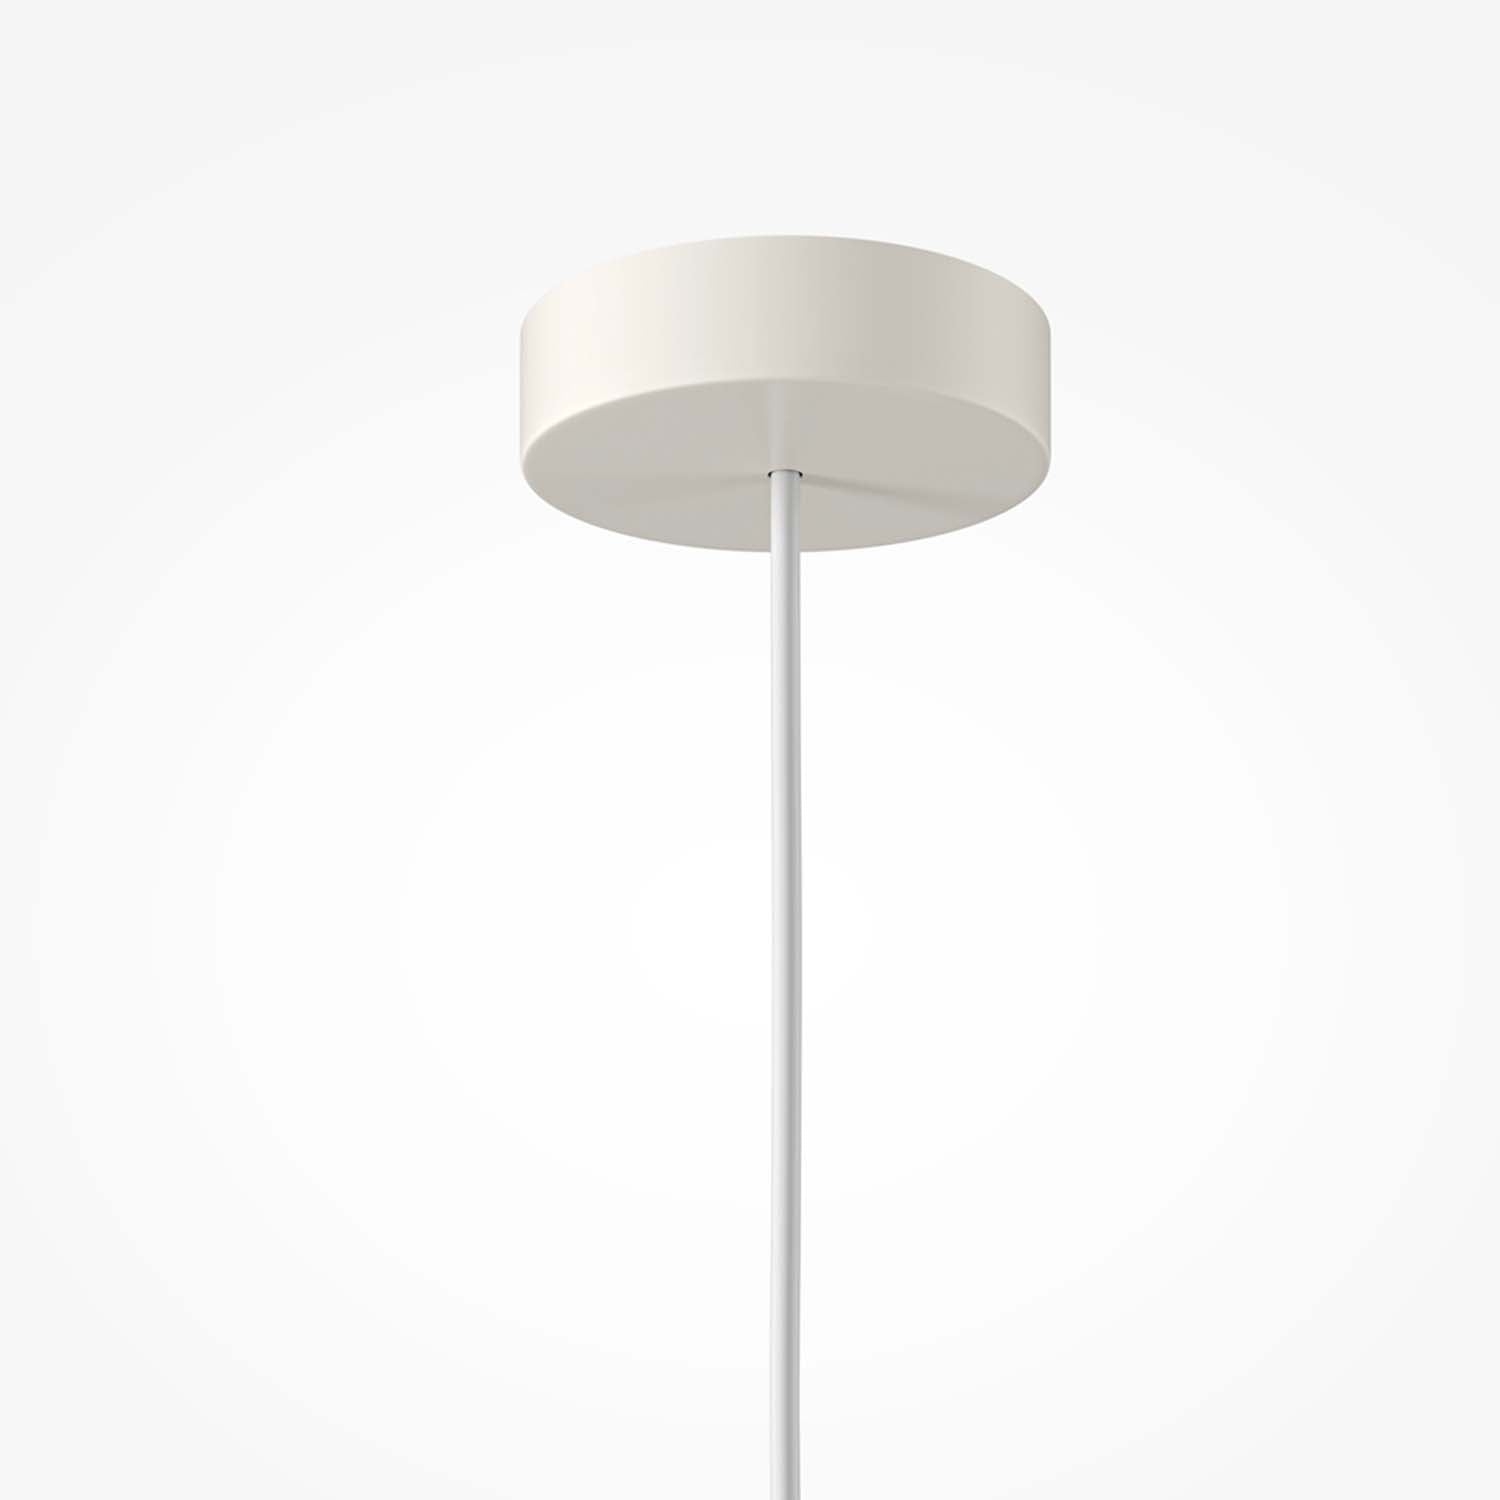 KYOTO - Designer and chic pendant light in marble and glass